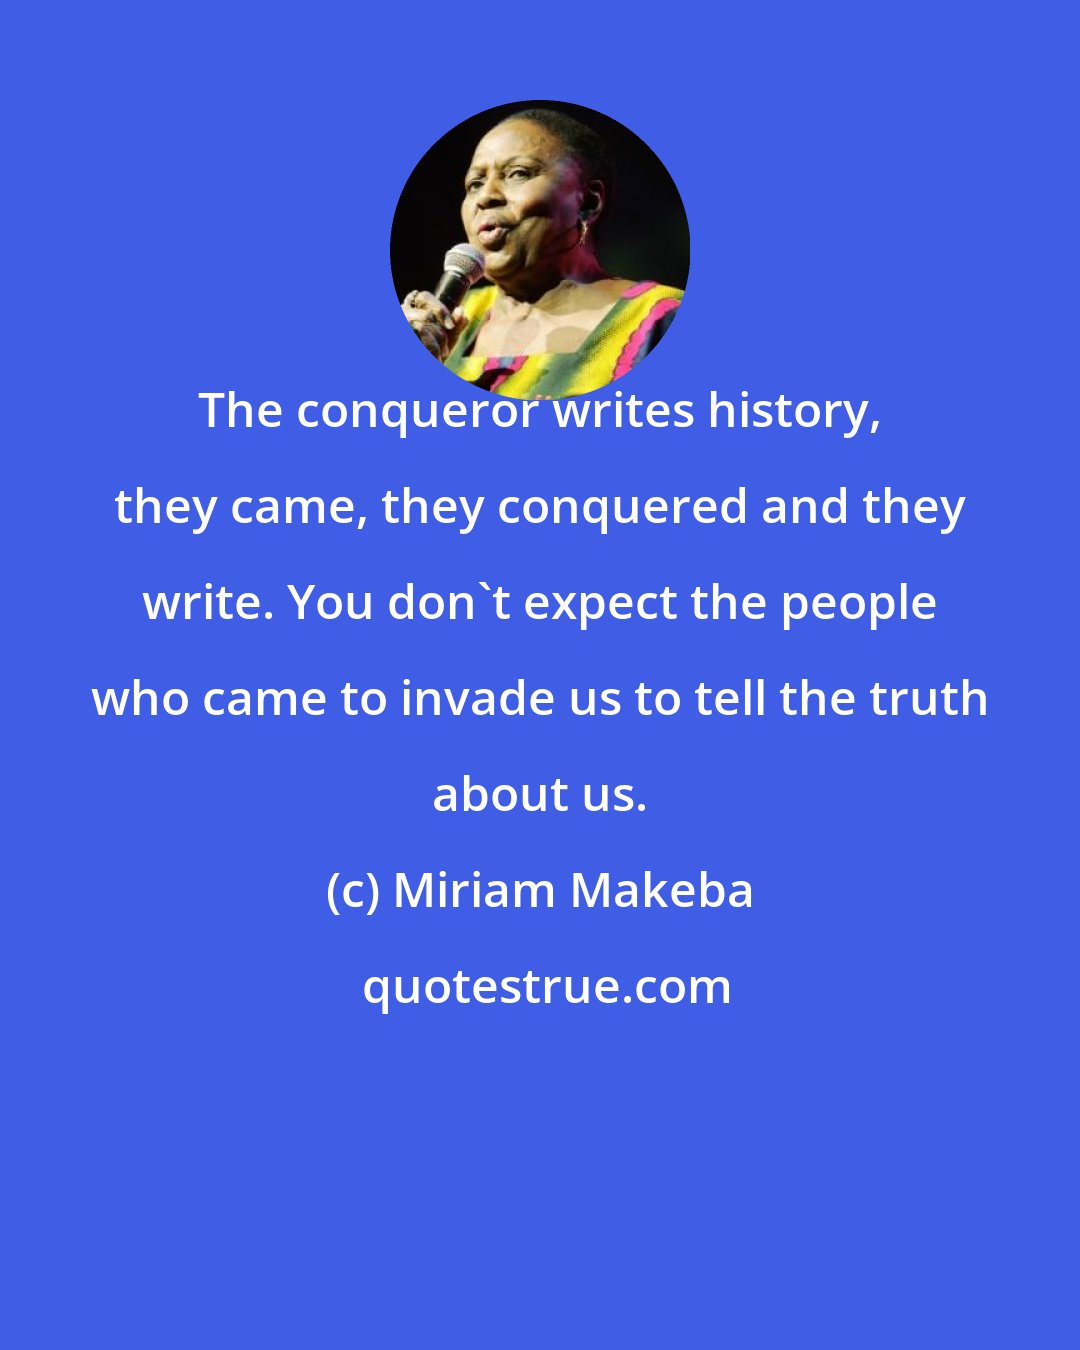 Miriam Makeba: The conqueror writes history, they came, they conquered and they write. You don't expect the people who came to invade us to tell the truth about us.